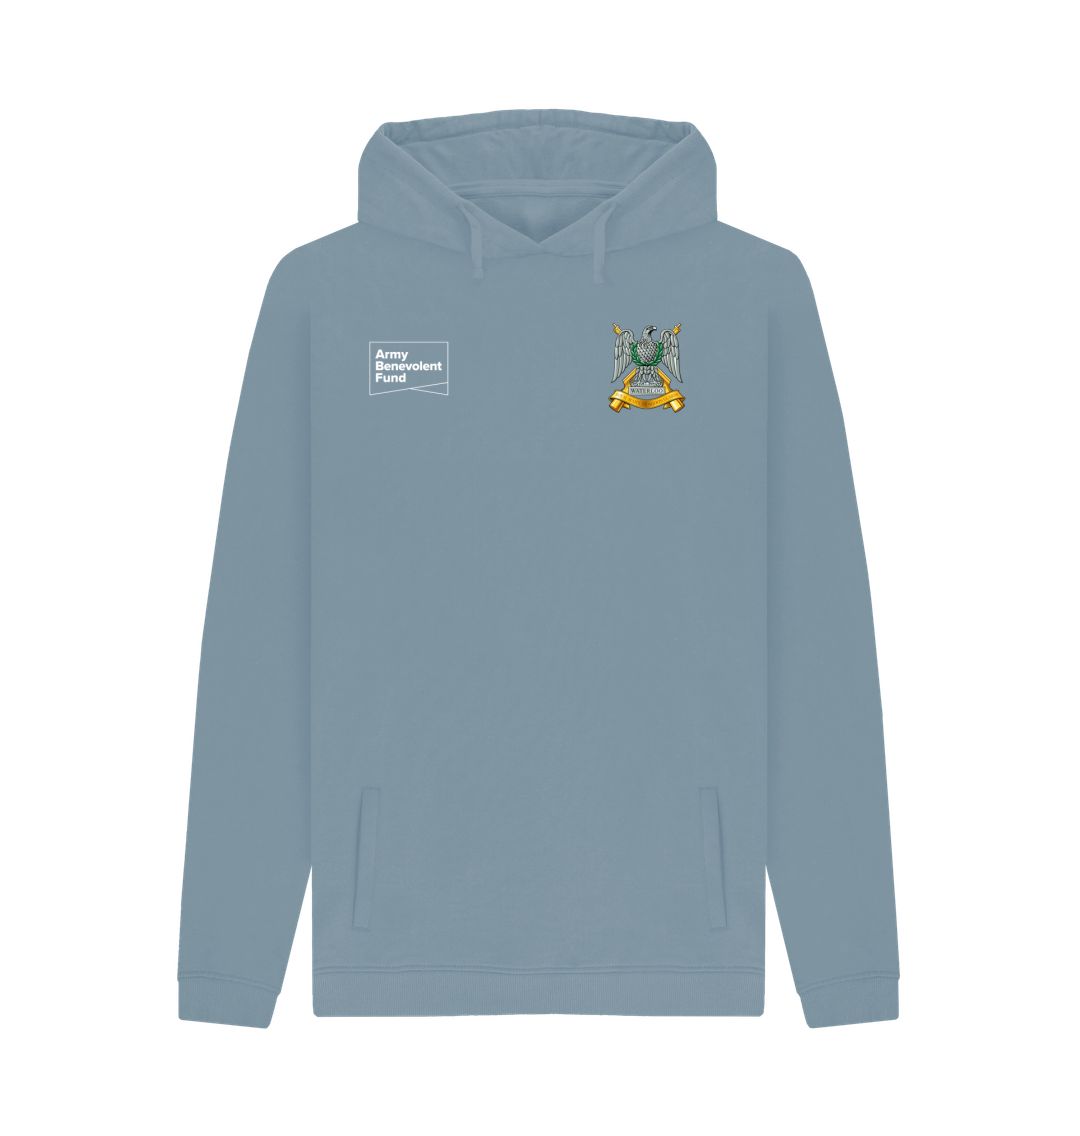 The Royal Scots Dragoon Guards Unisex Hoodie - Army Benevolent Fund